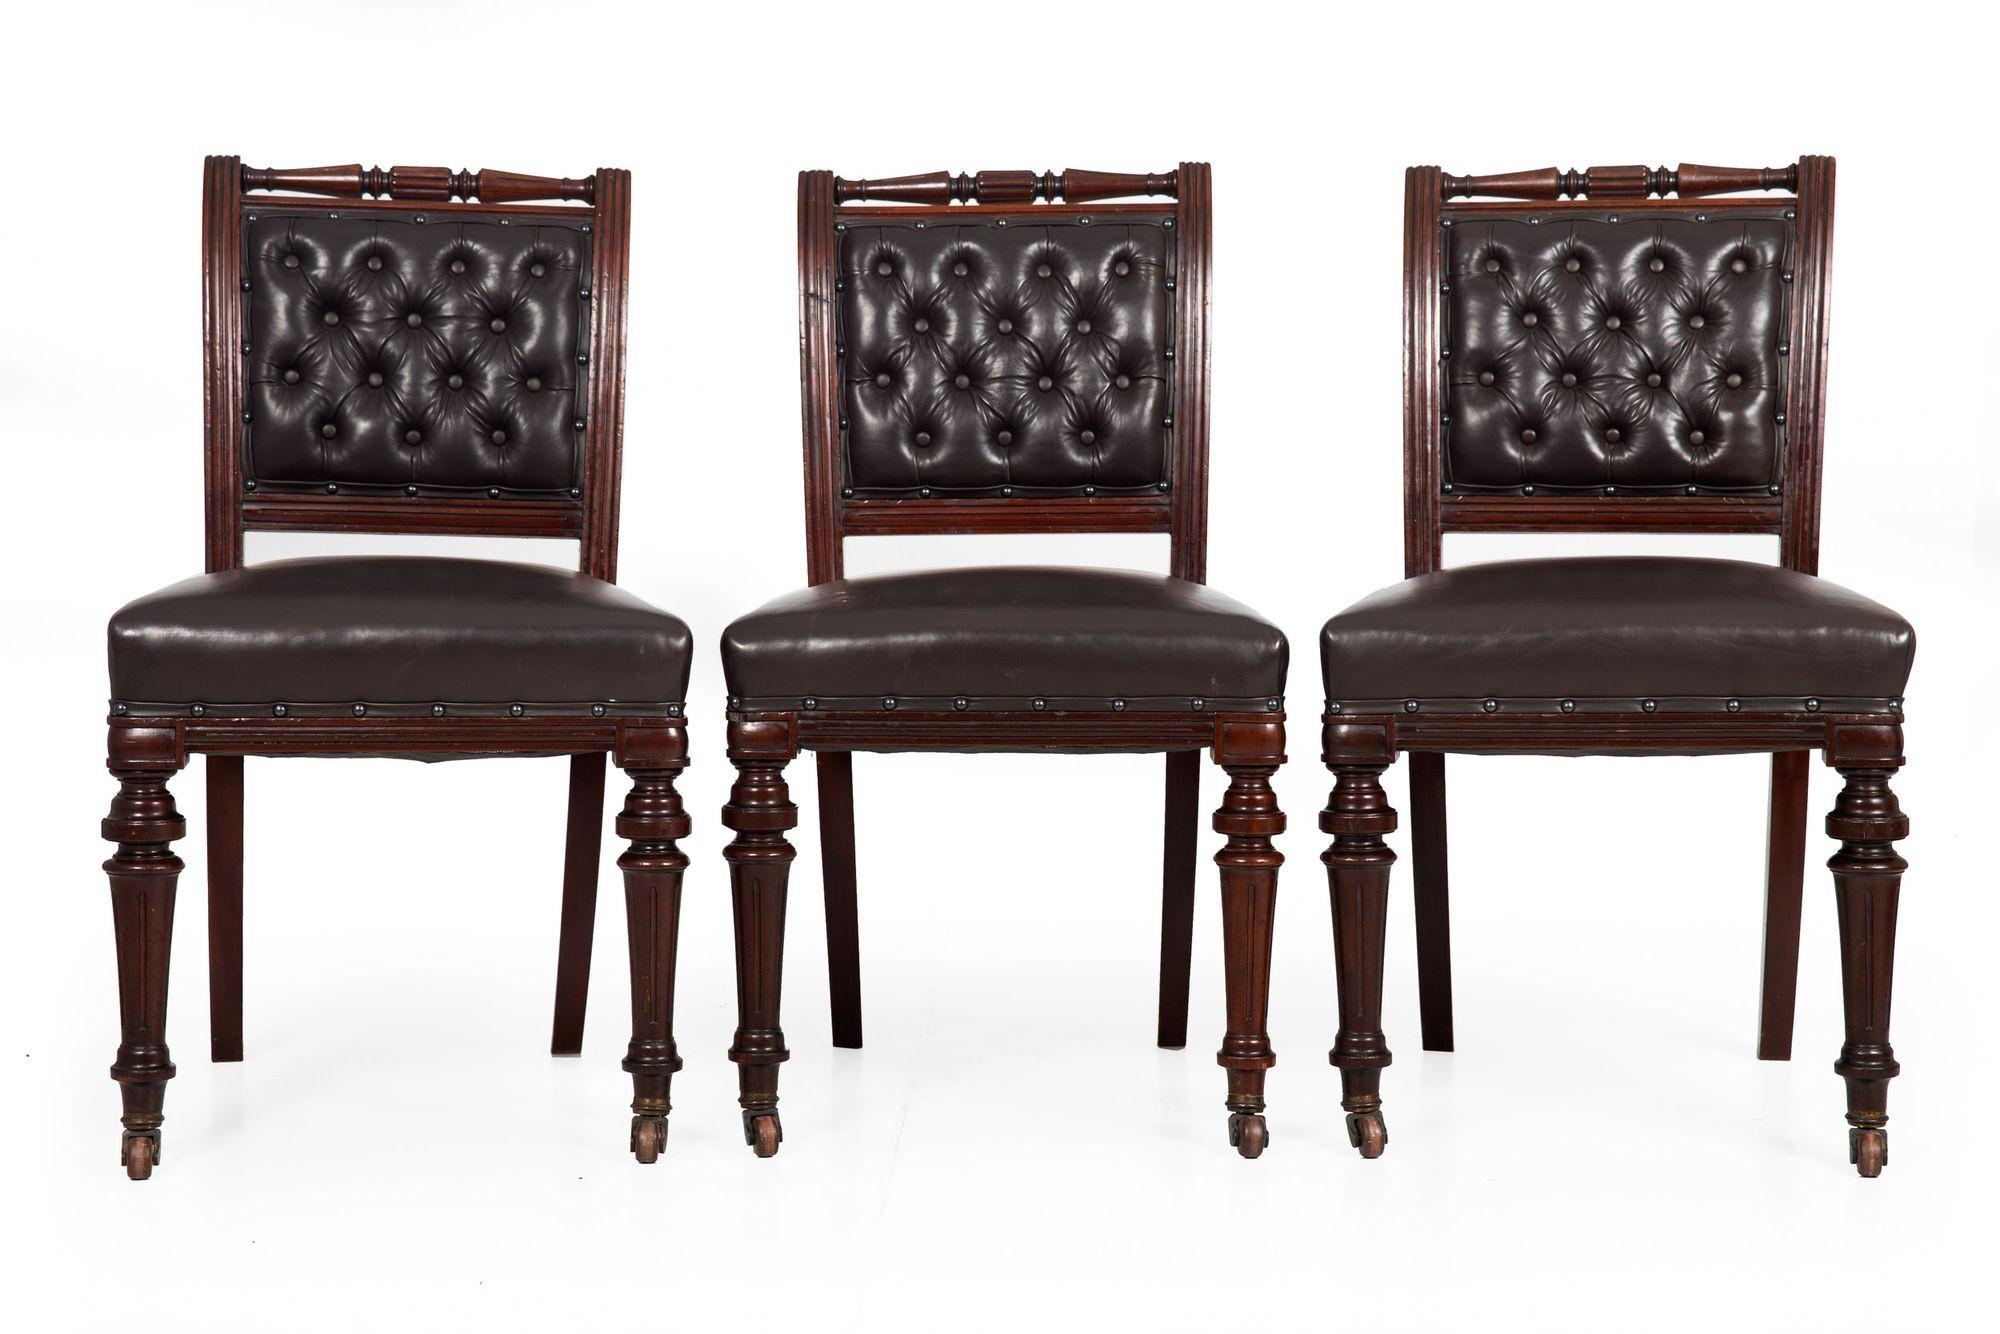 Set of 6 English Antique Mahogany and Leather Dining Chairs, 19th Century For Sale 2